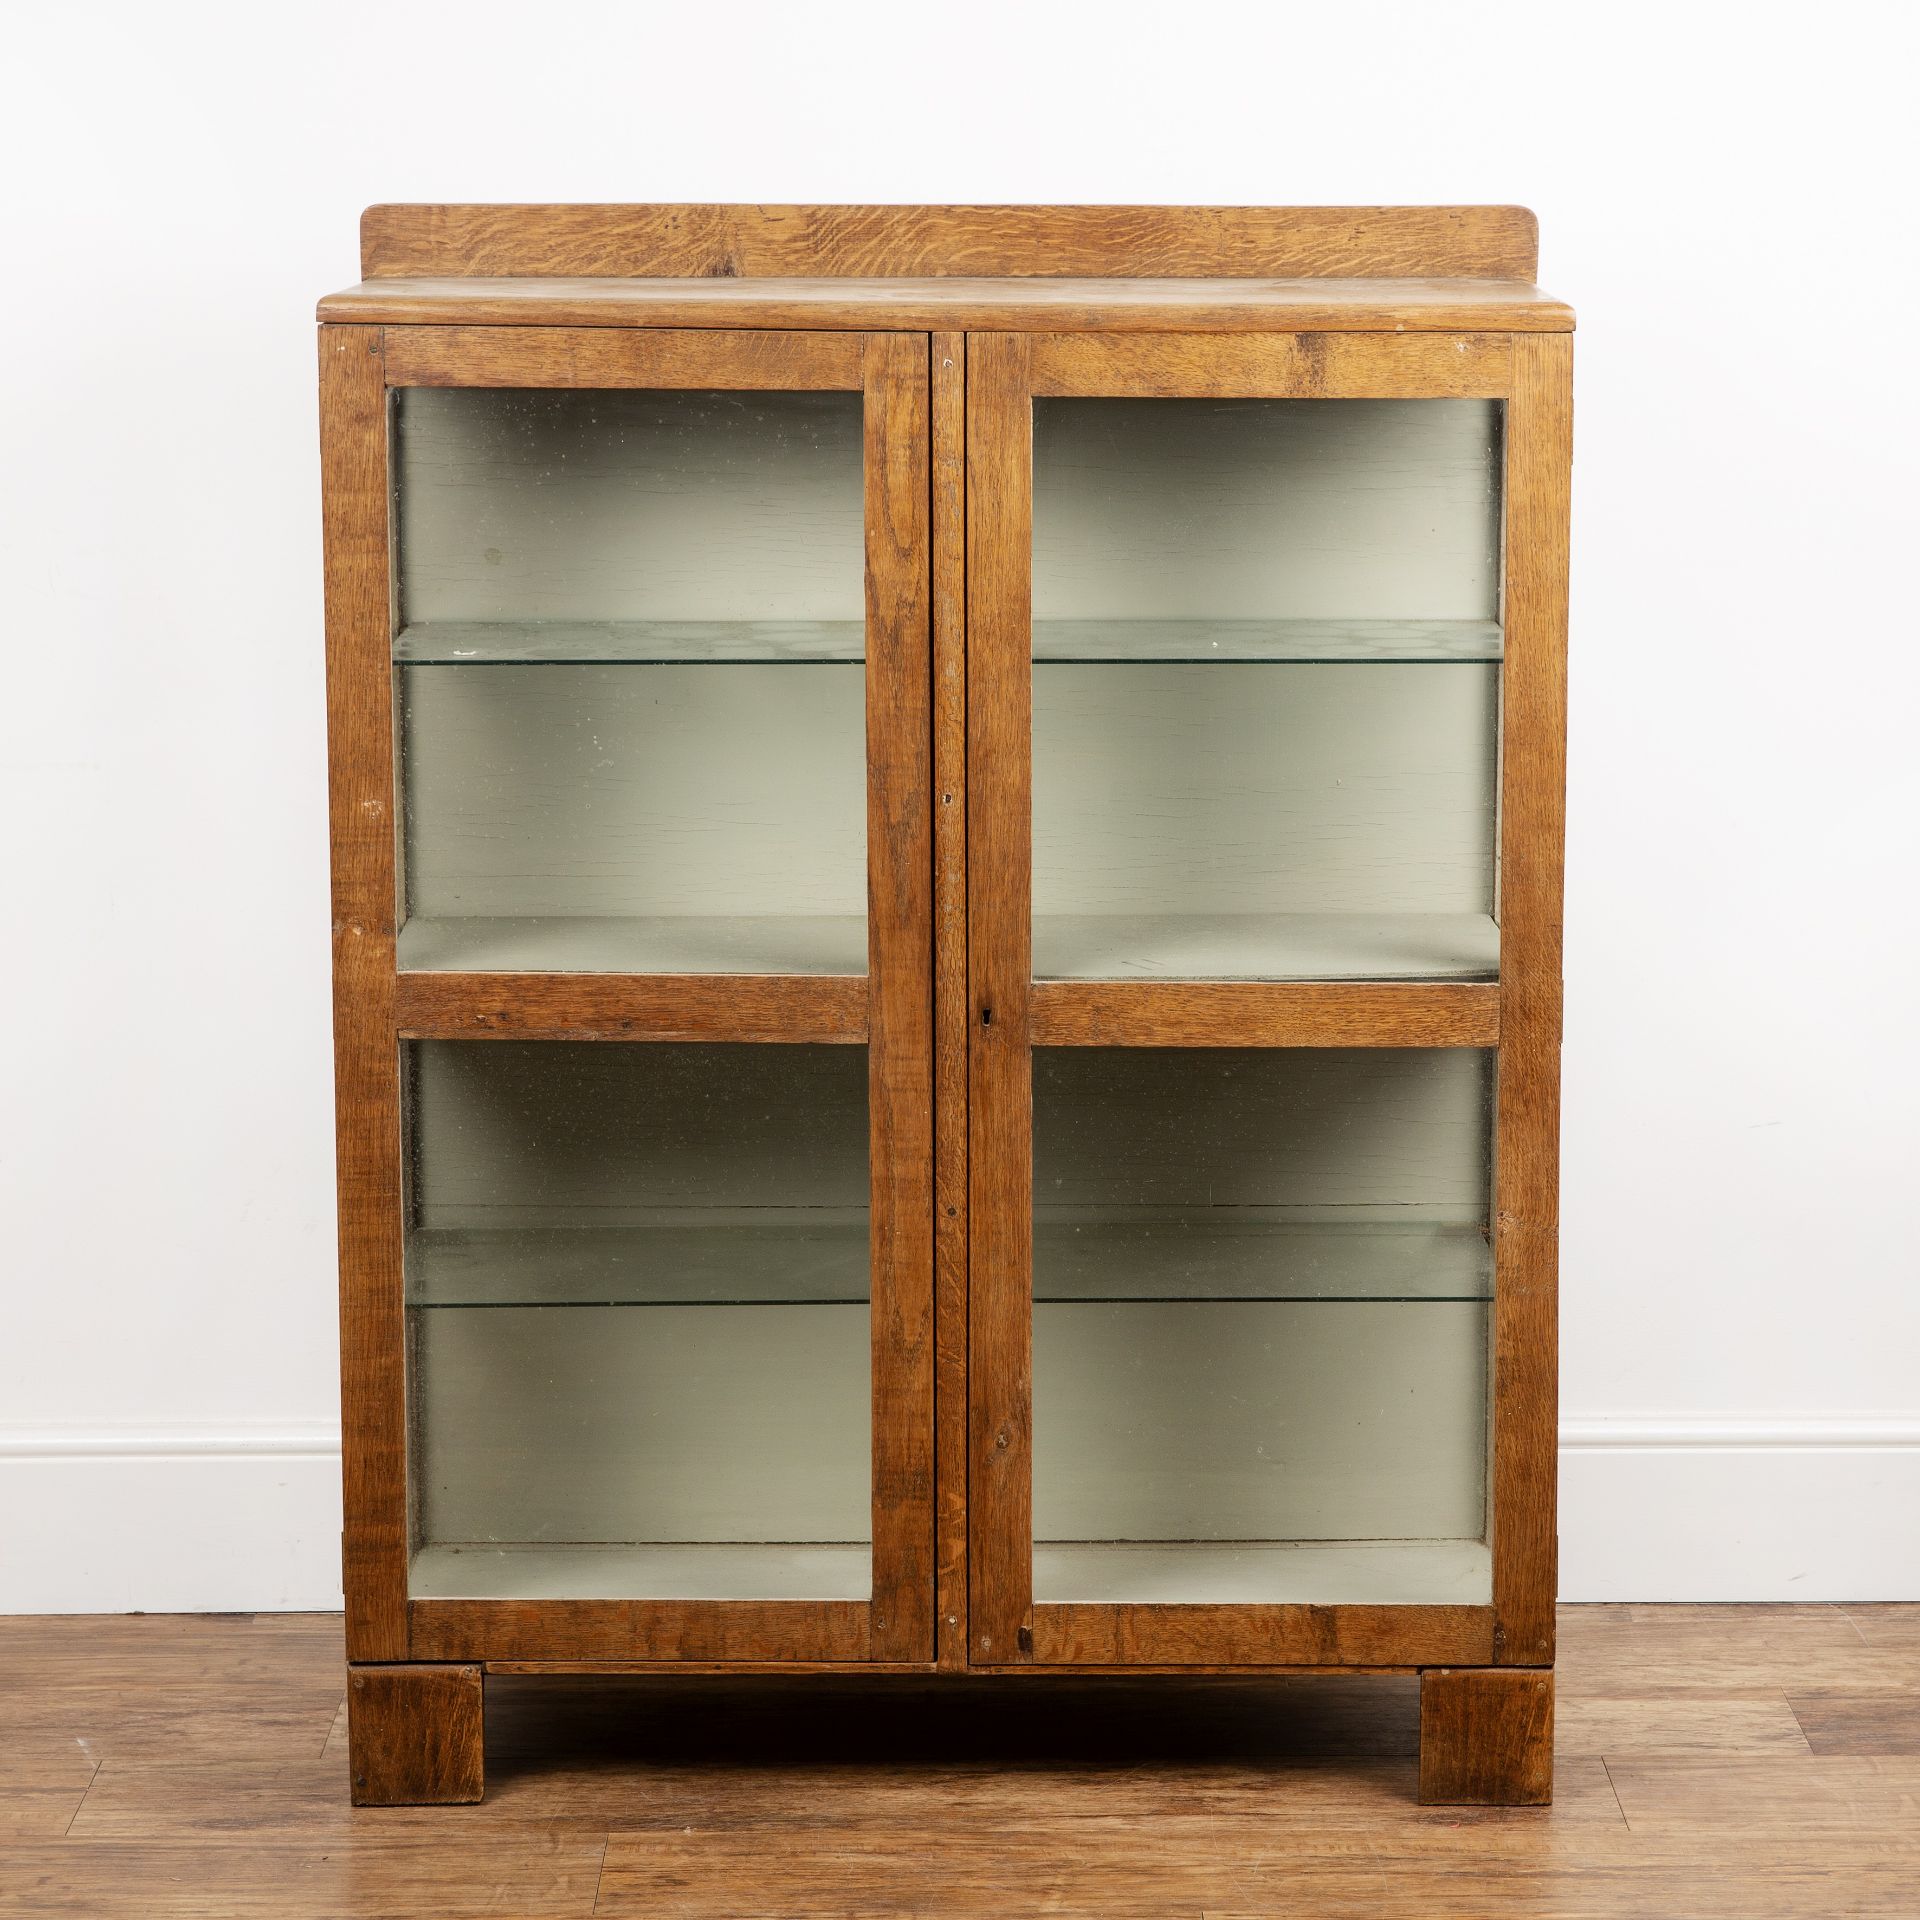 Cotswold School oak, glazed bookcase or cabinet, with galleried back above panelled doors, 95cm wide